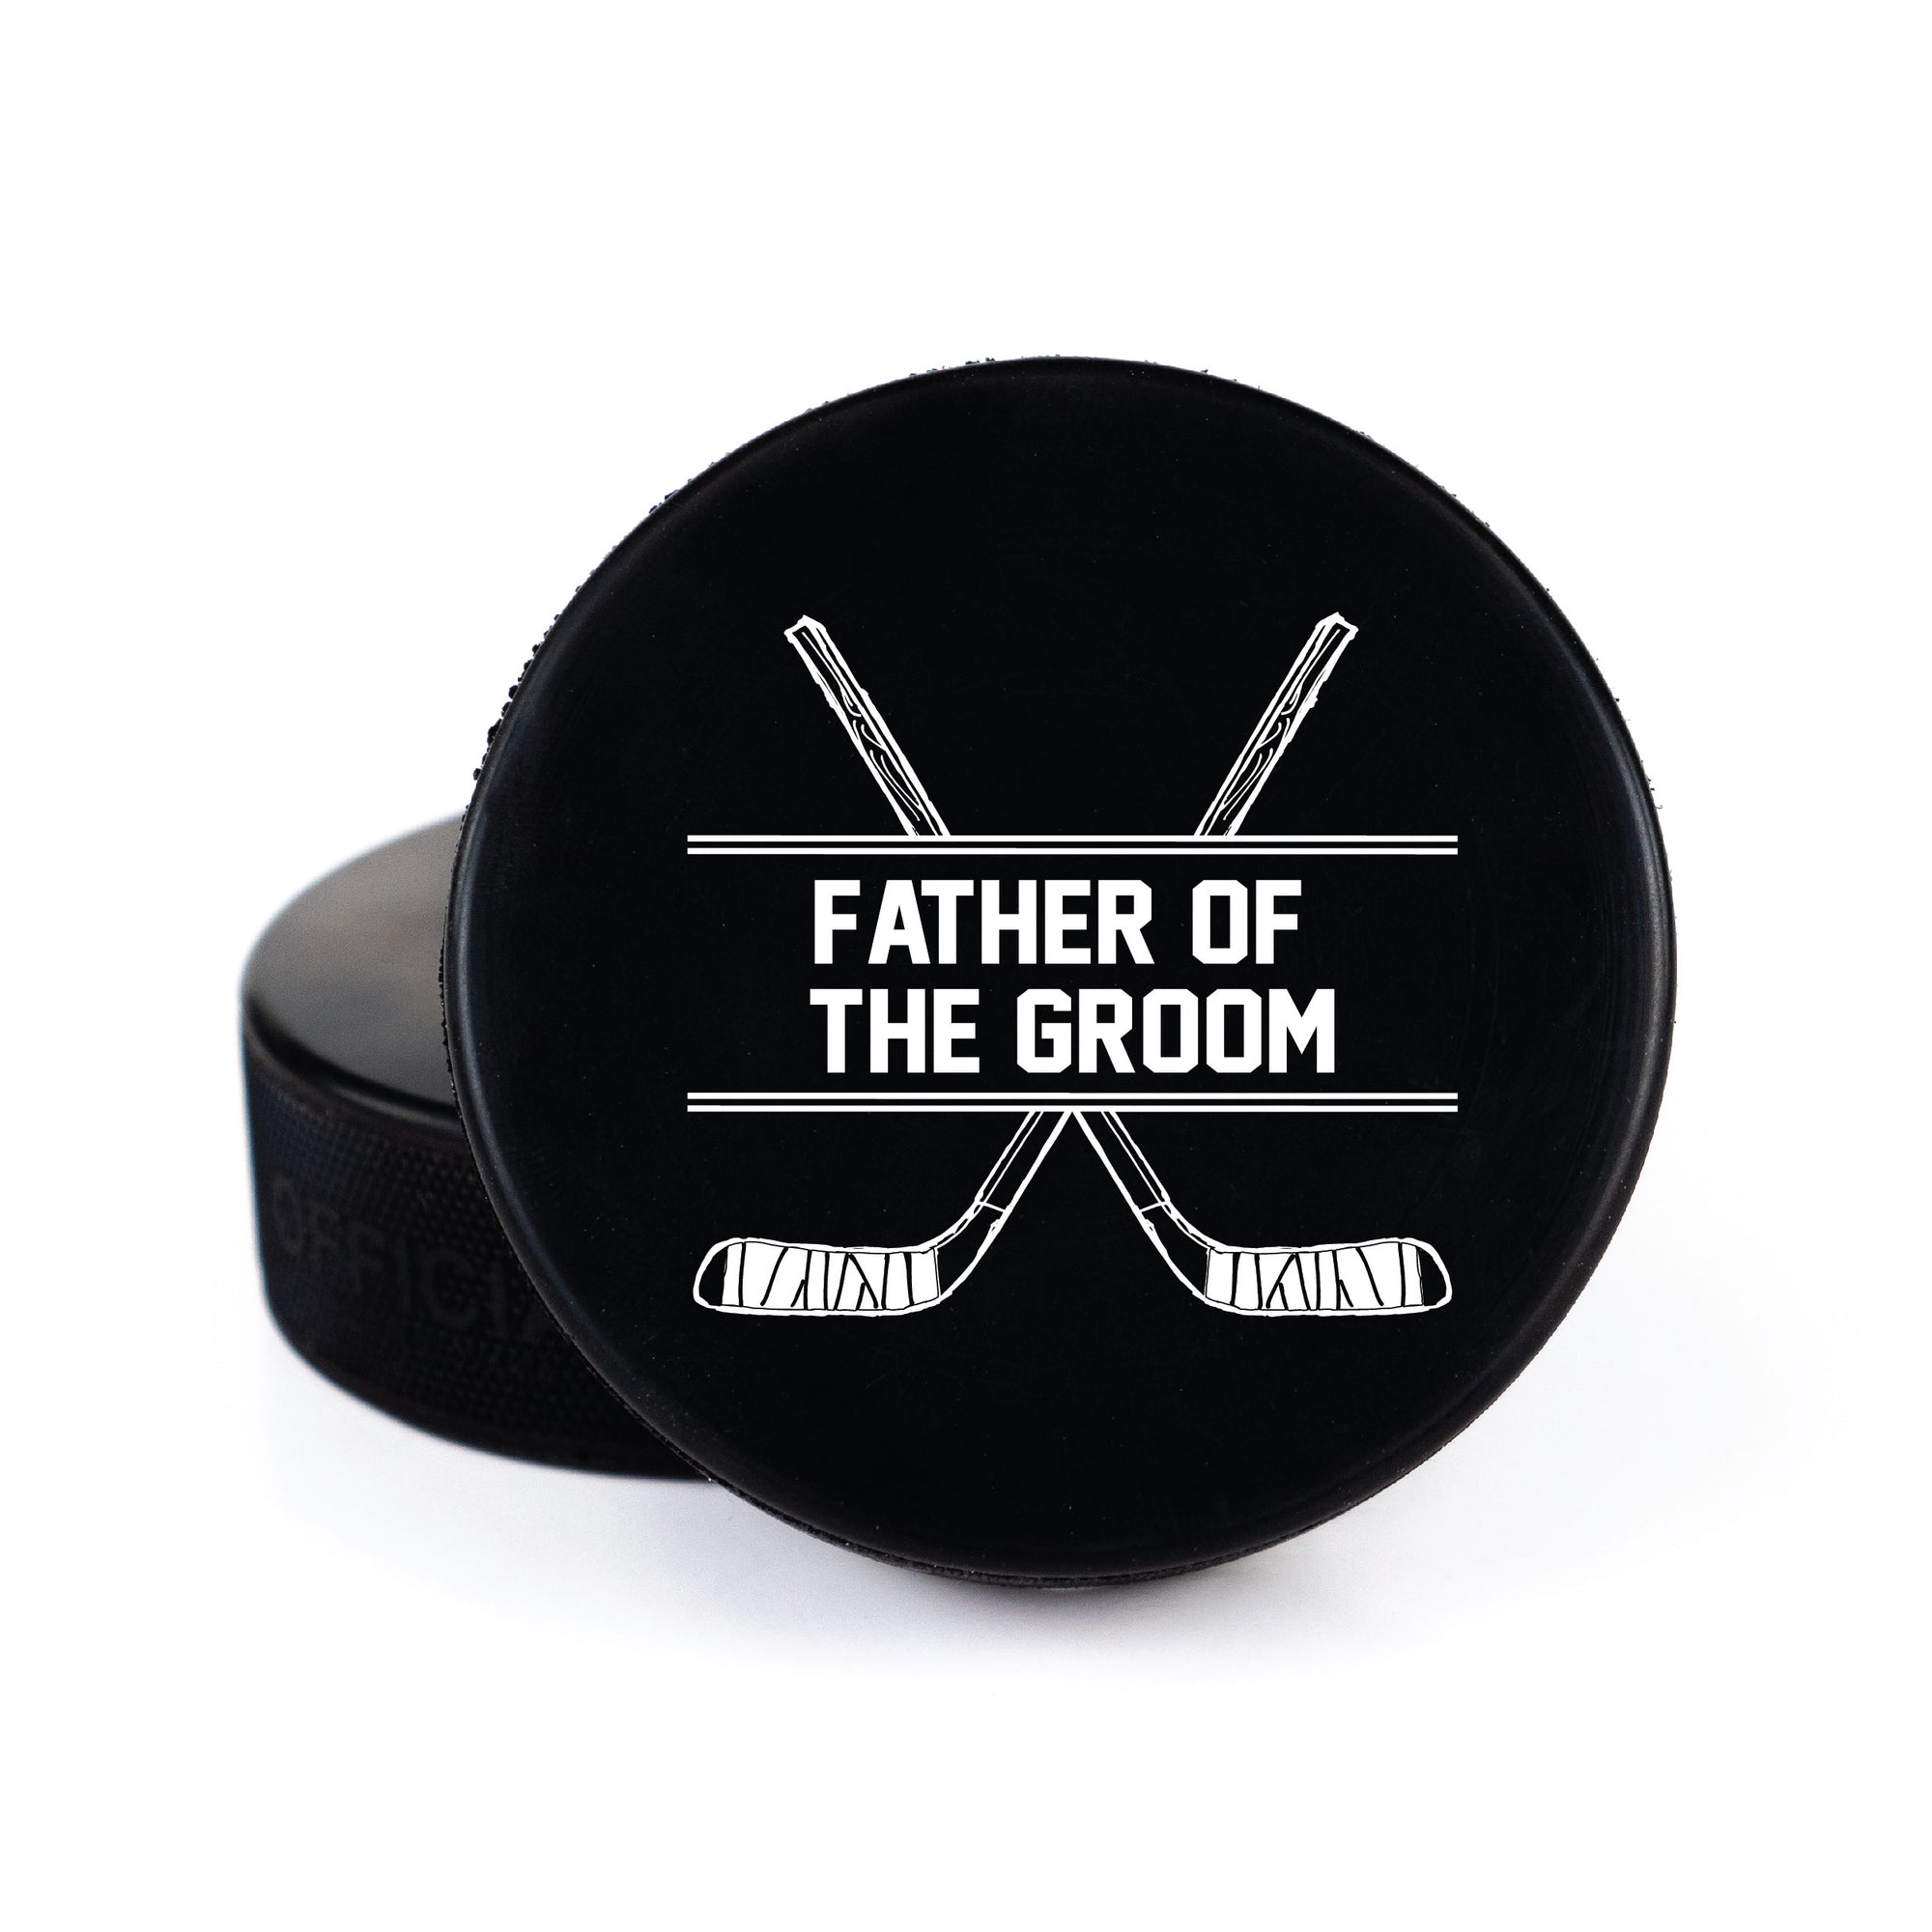 Printed Hockey Puck with Father of the Groom Design